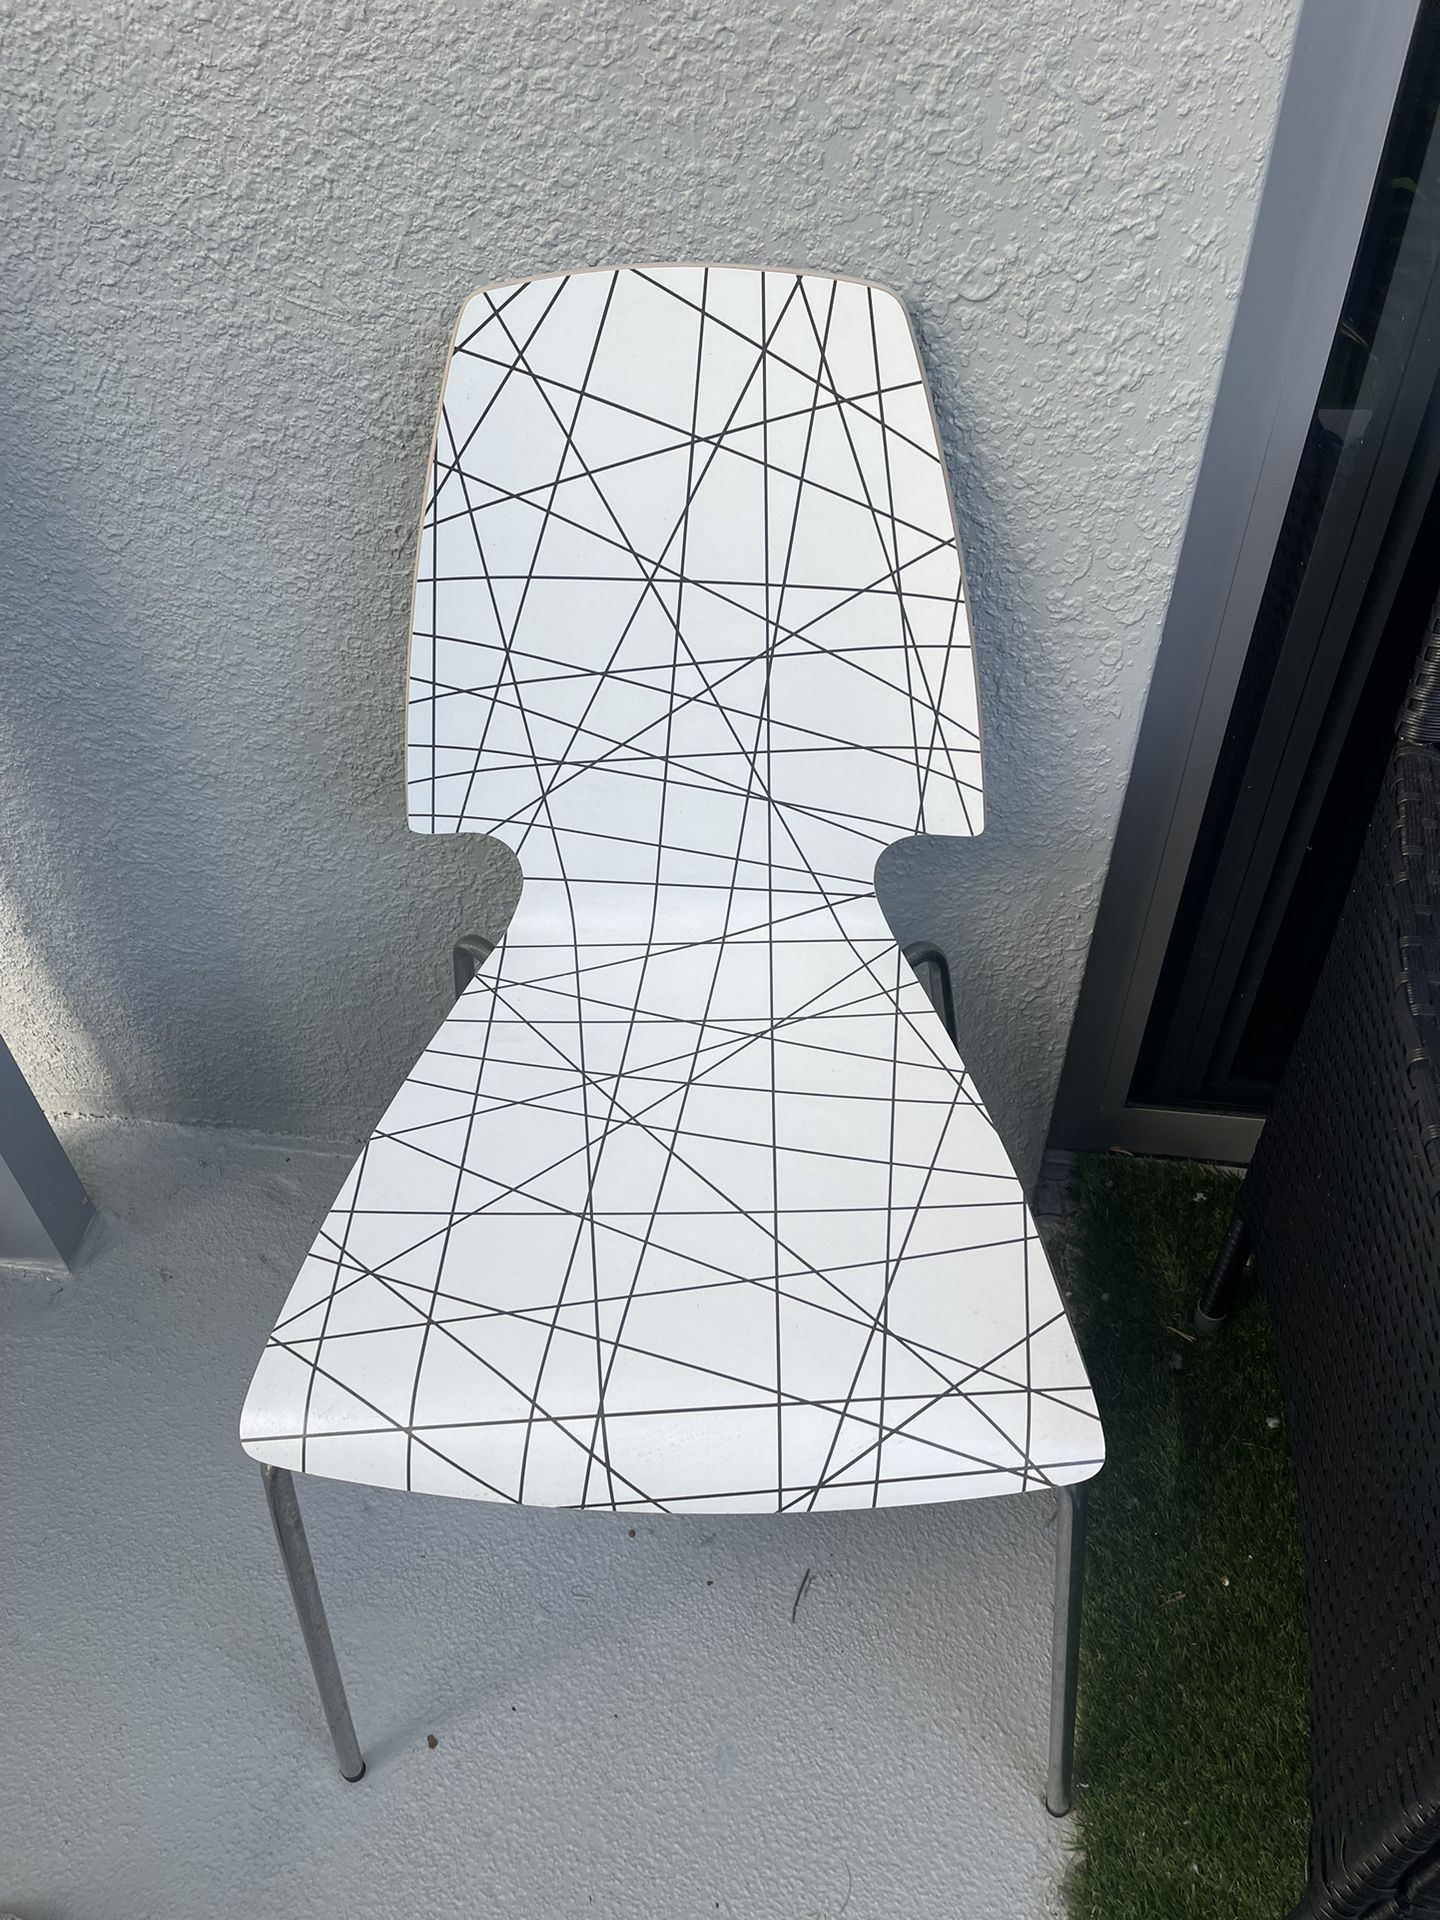 2 IKEA Chairs - White And Black Abstract